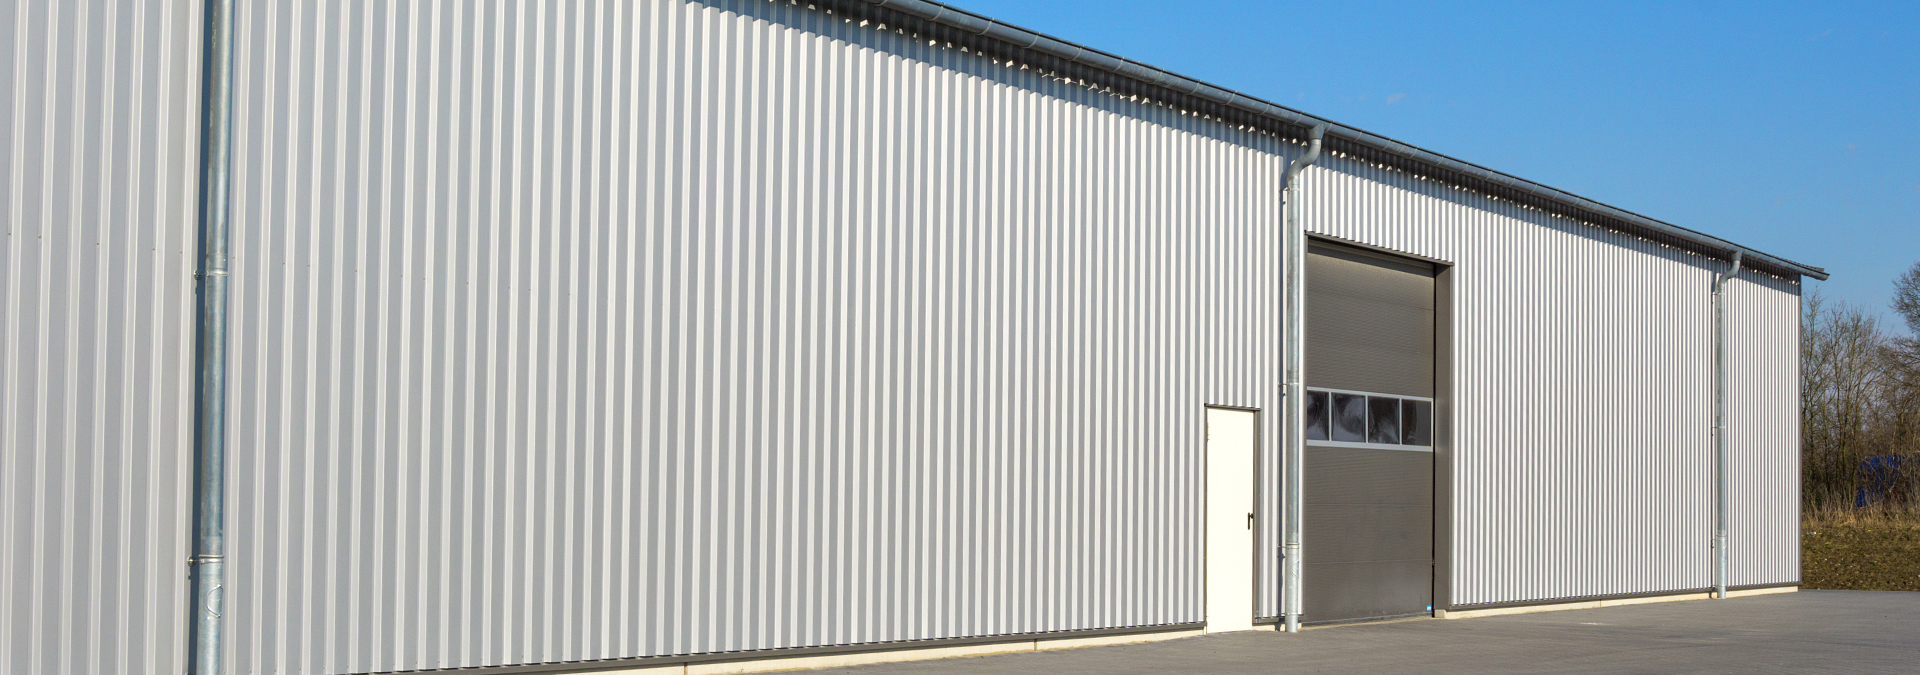 Custom metal siding on building by LBH Timber Mart